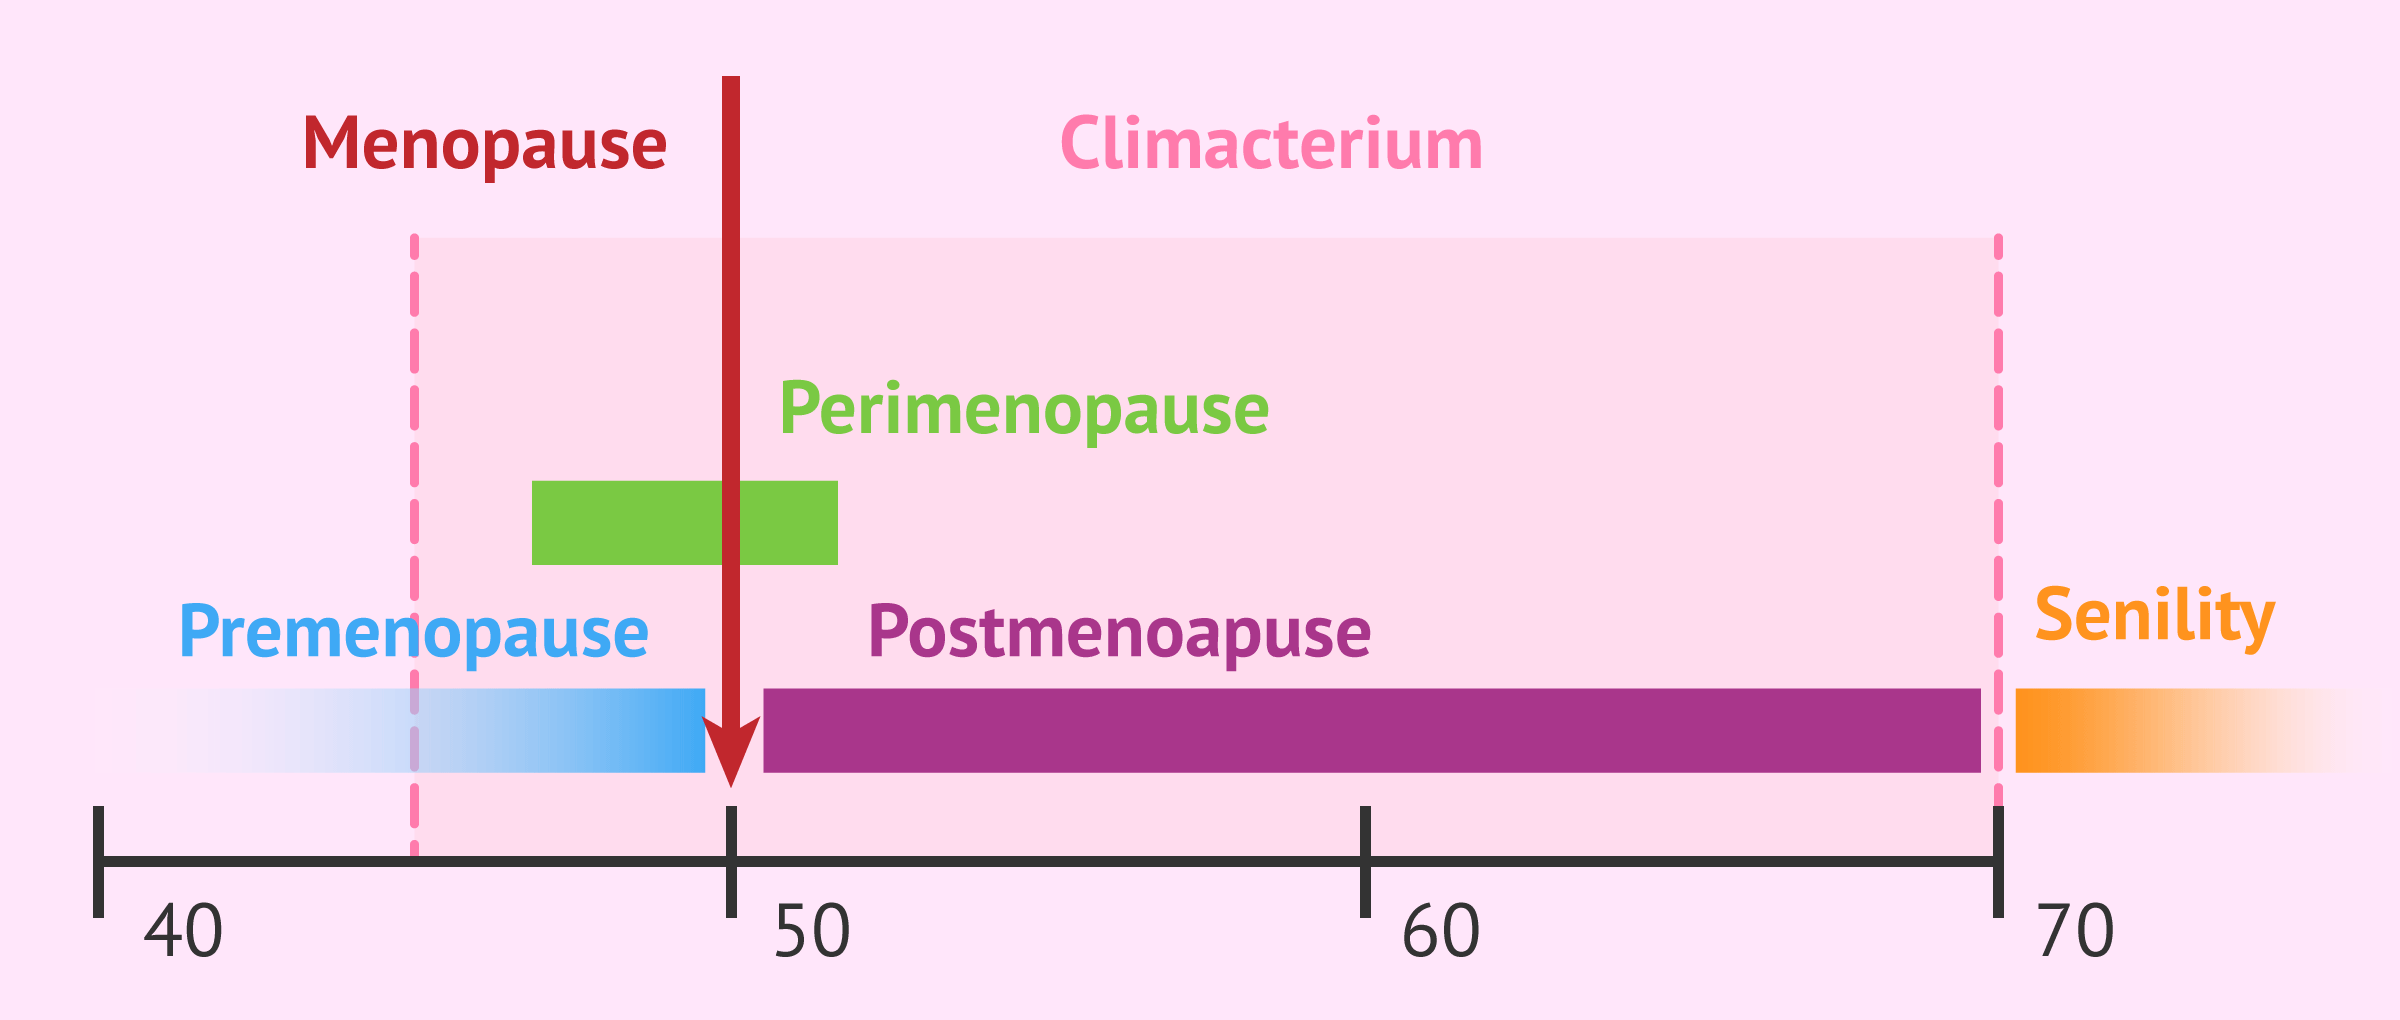 The different stages of menopause are all part of a period known as climact...